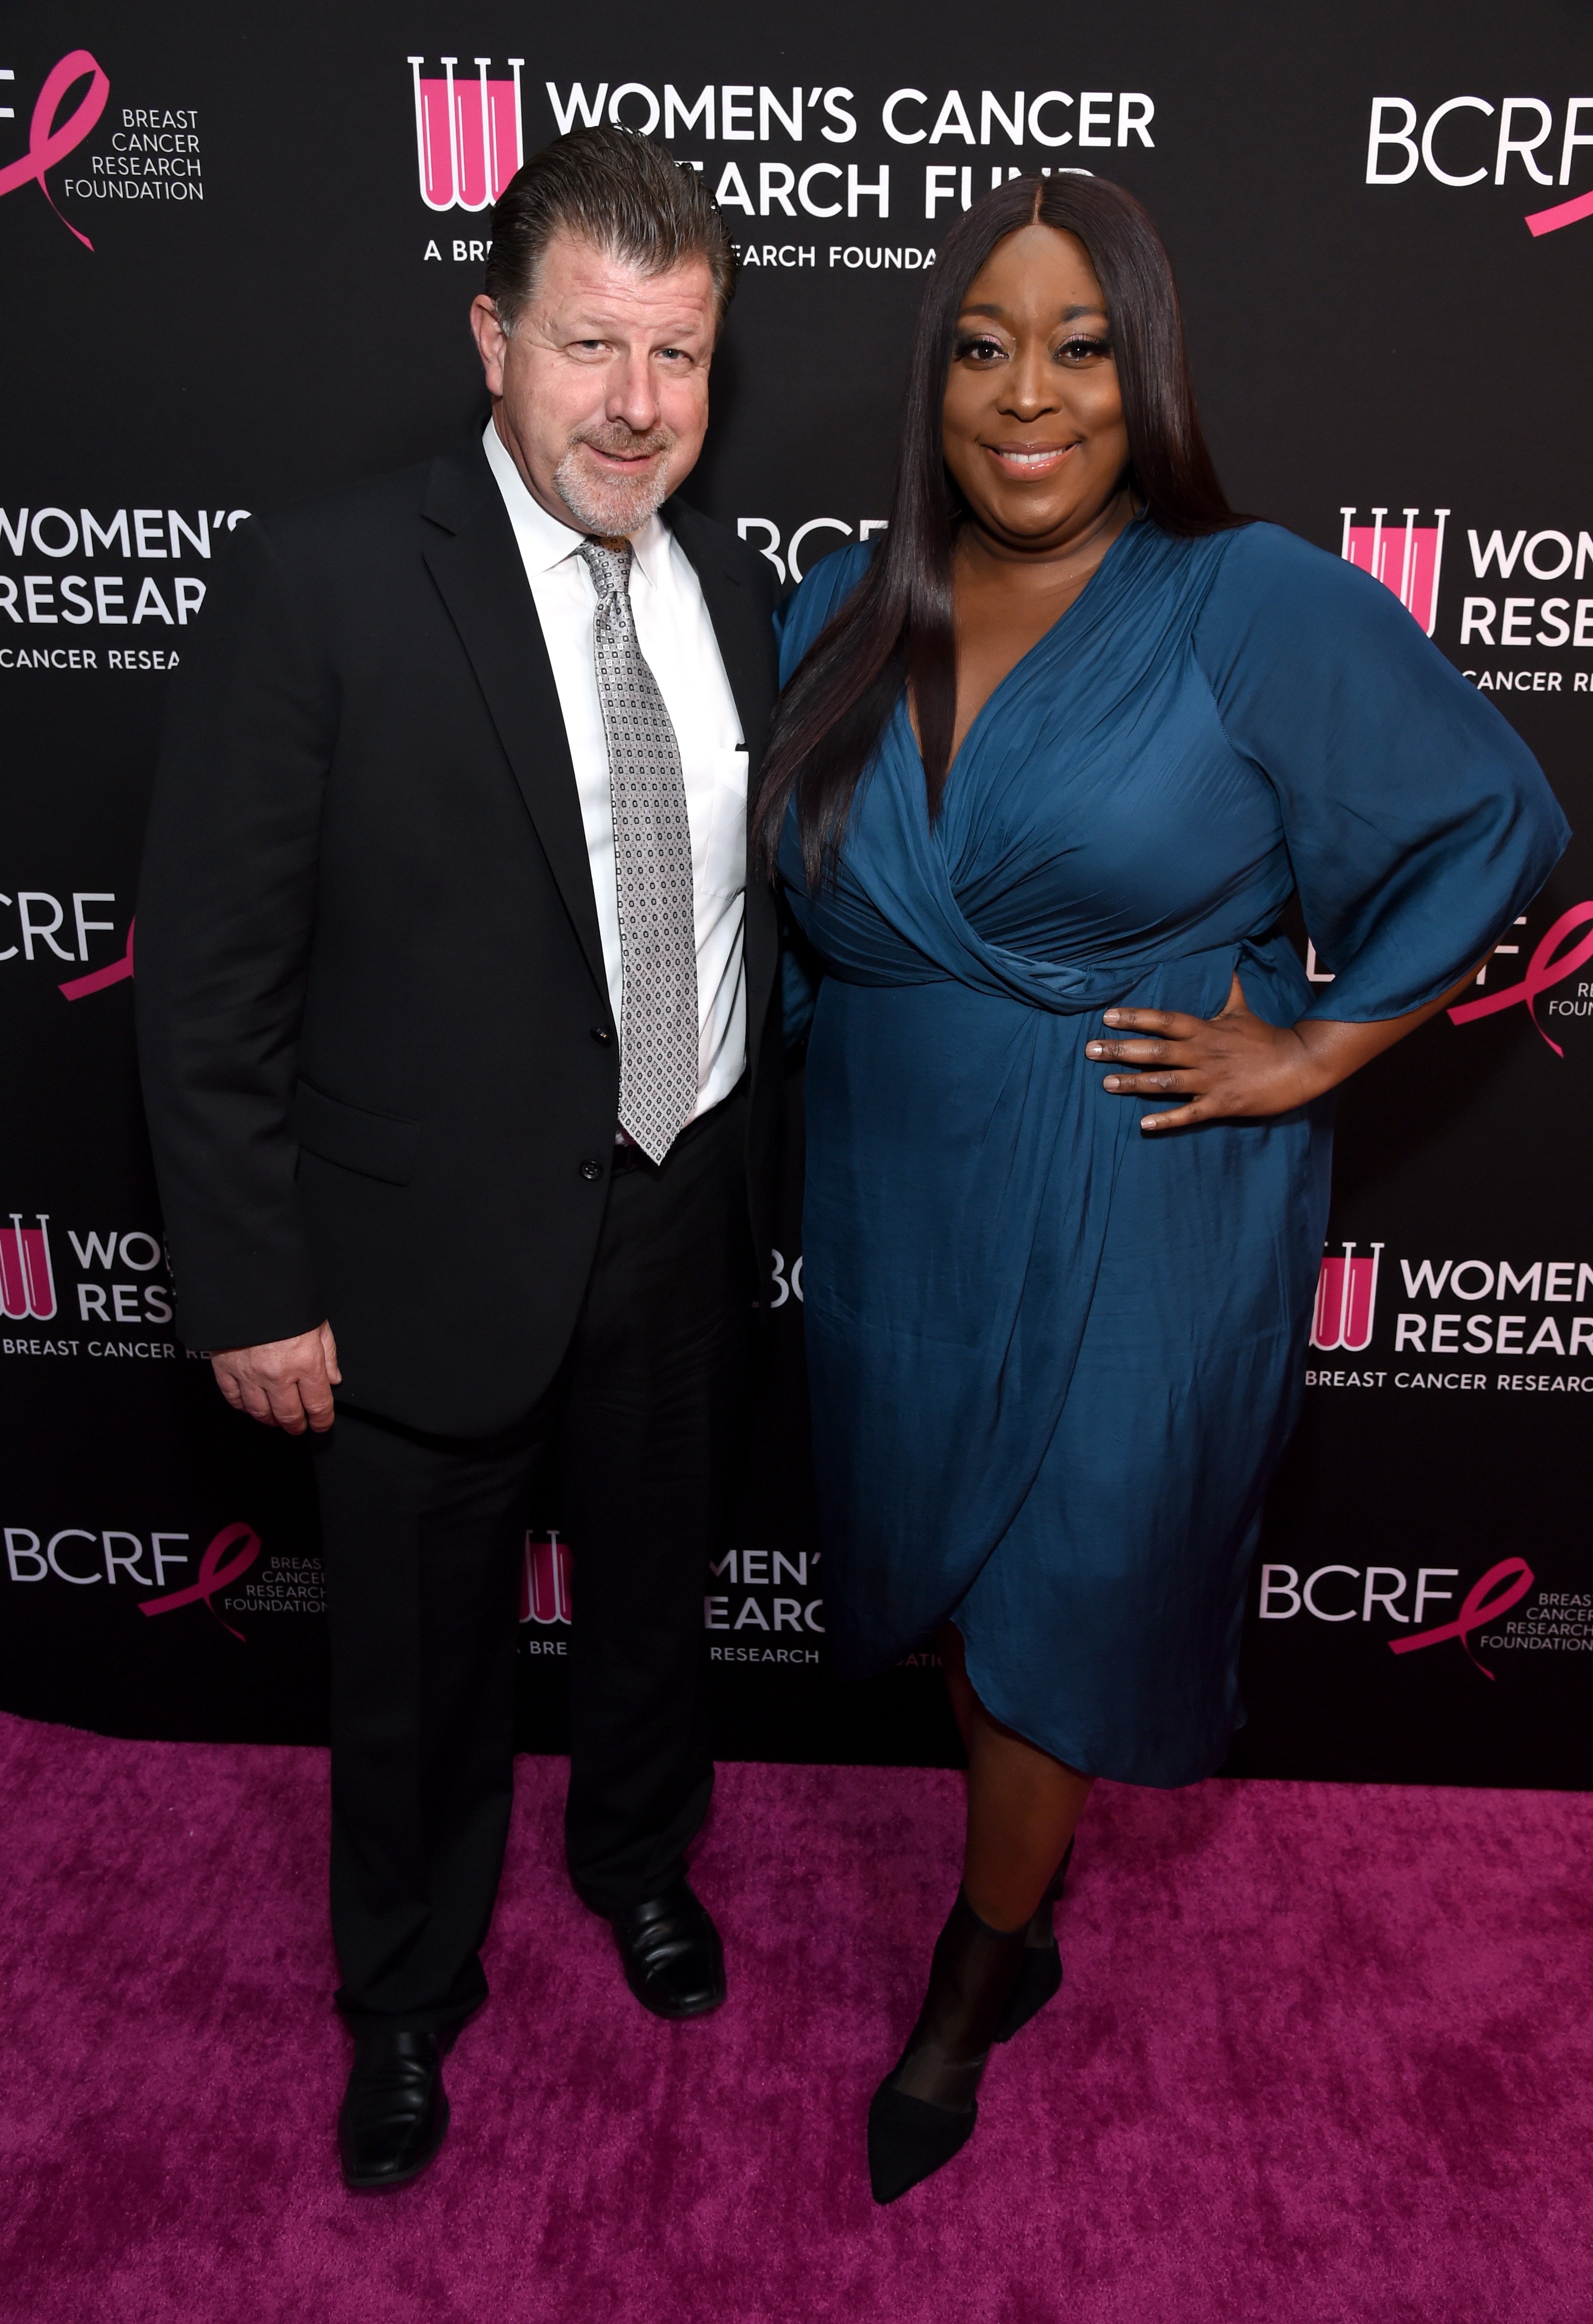 James Welsh & Loni Love at WCRF's "An Unforgettable Evening" on Feb. 28, 2019 in California | Photo: Getty Images